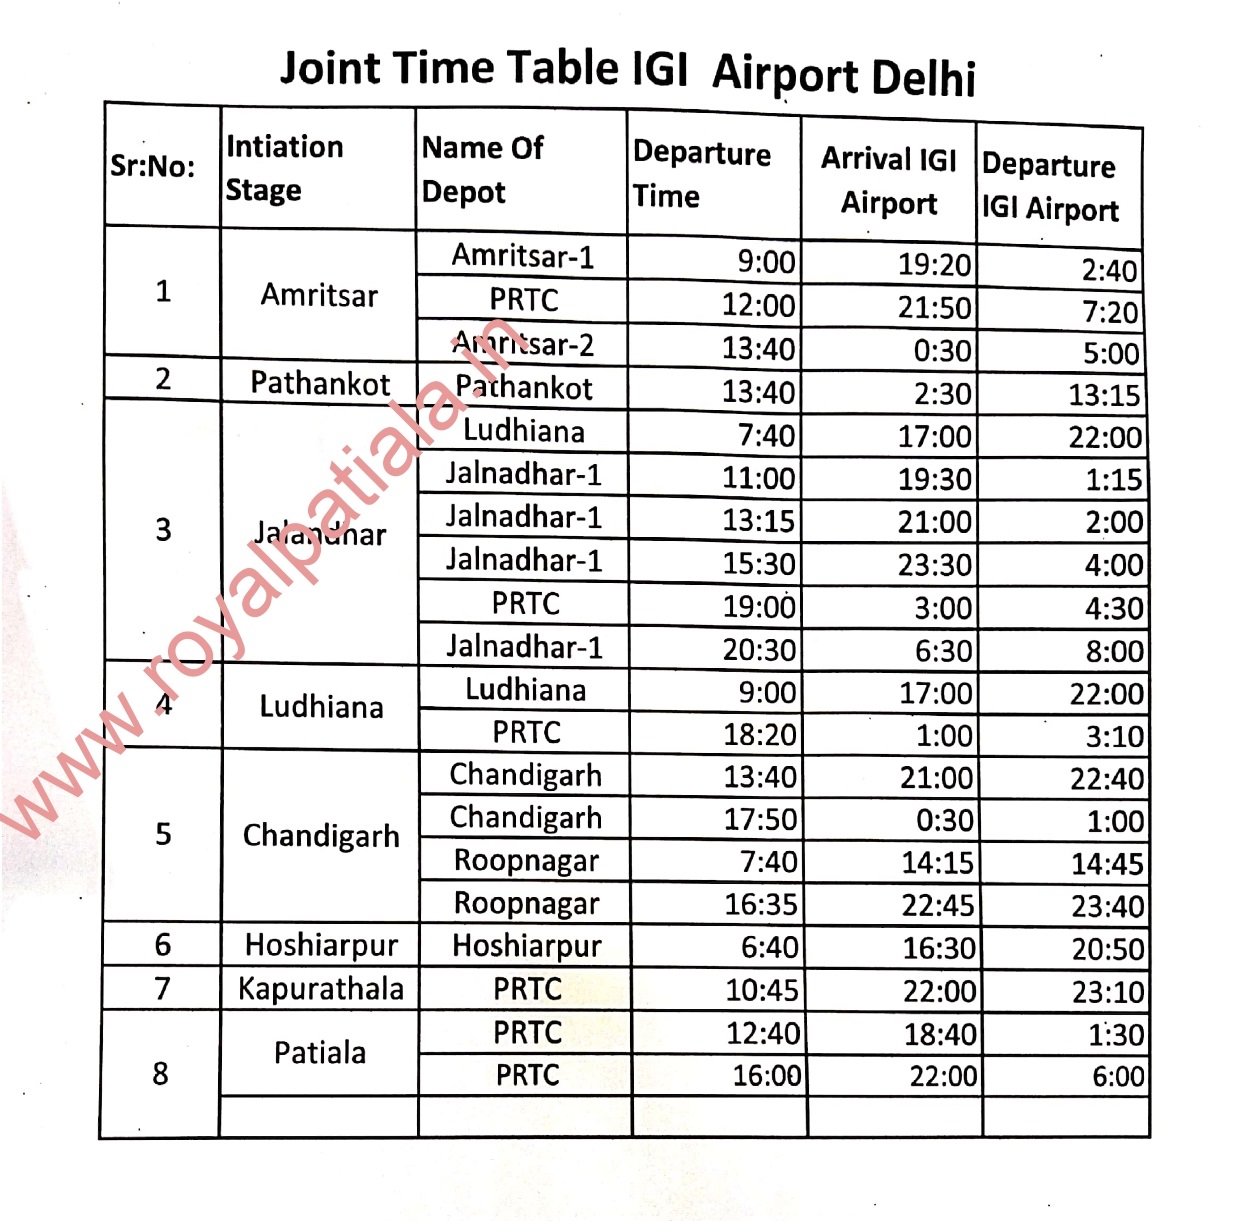 PUNBUS, PRTC buses joint timetable from Punjab to IGI Delhi airport released